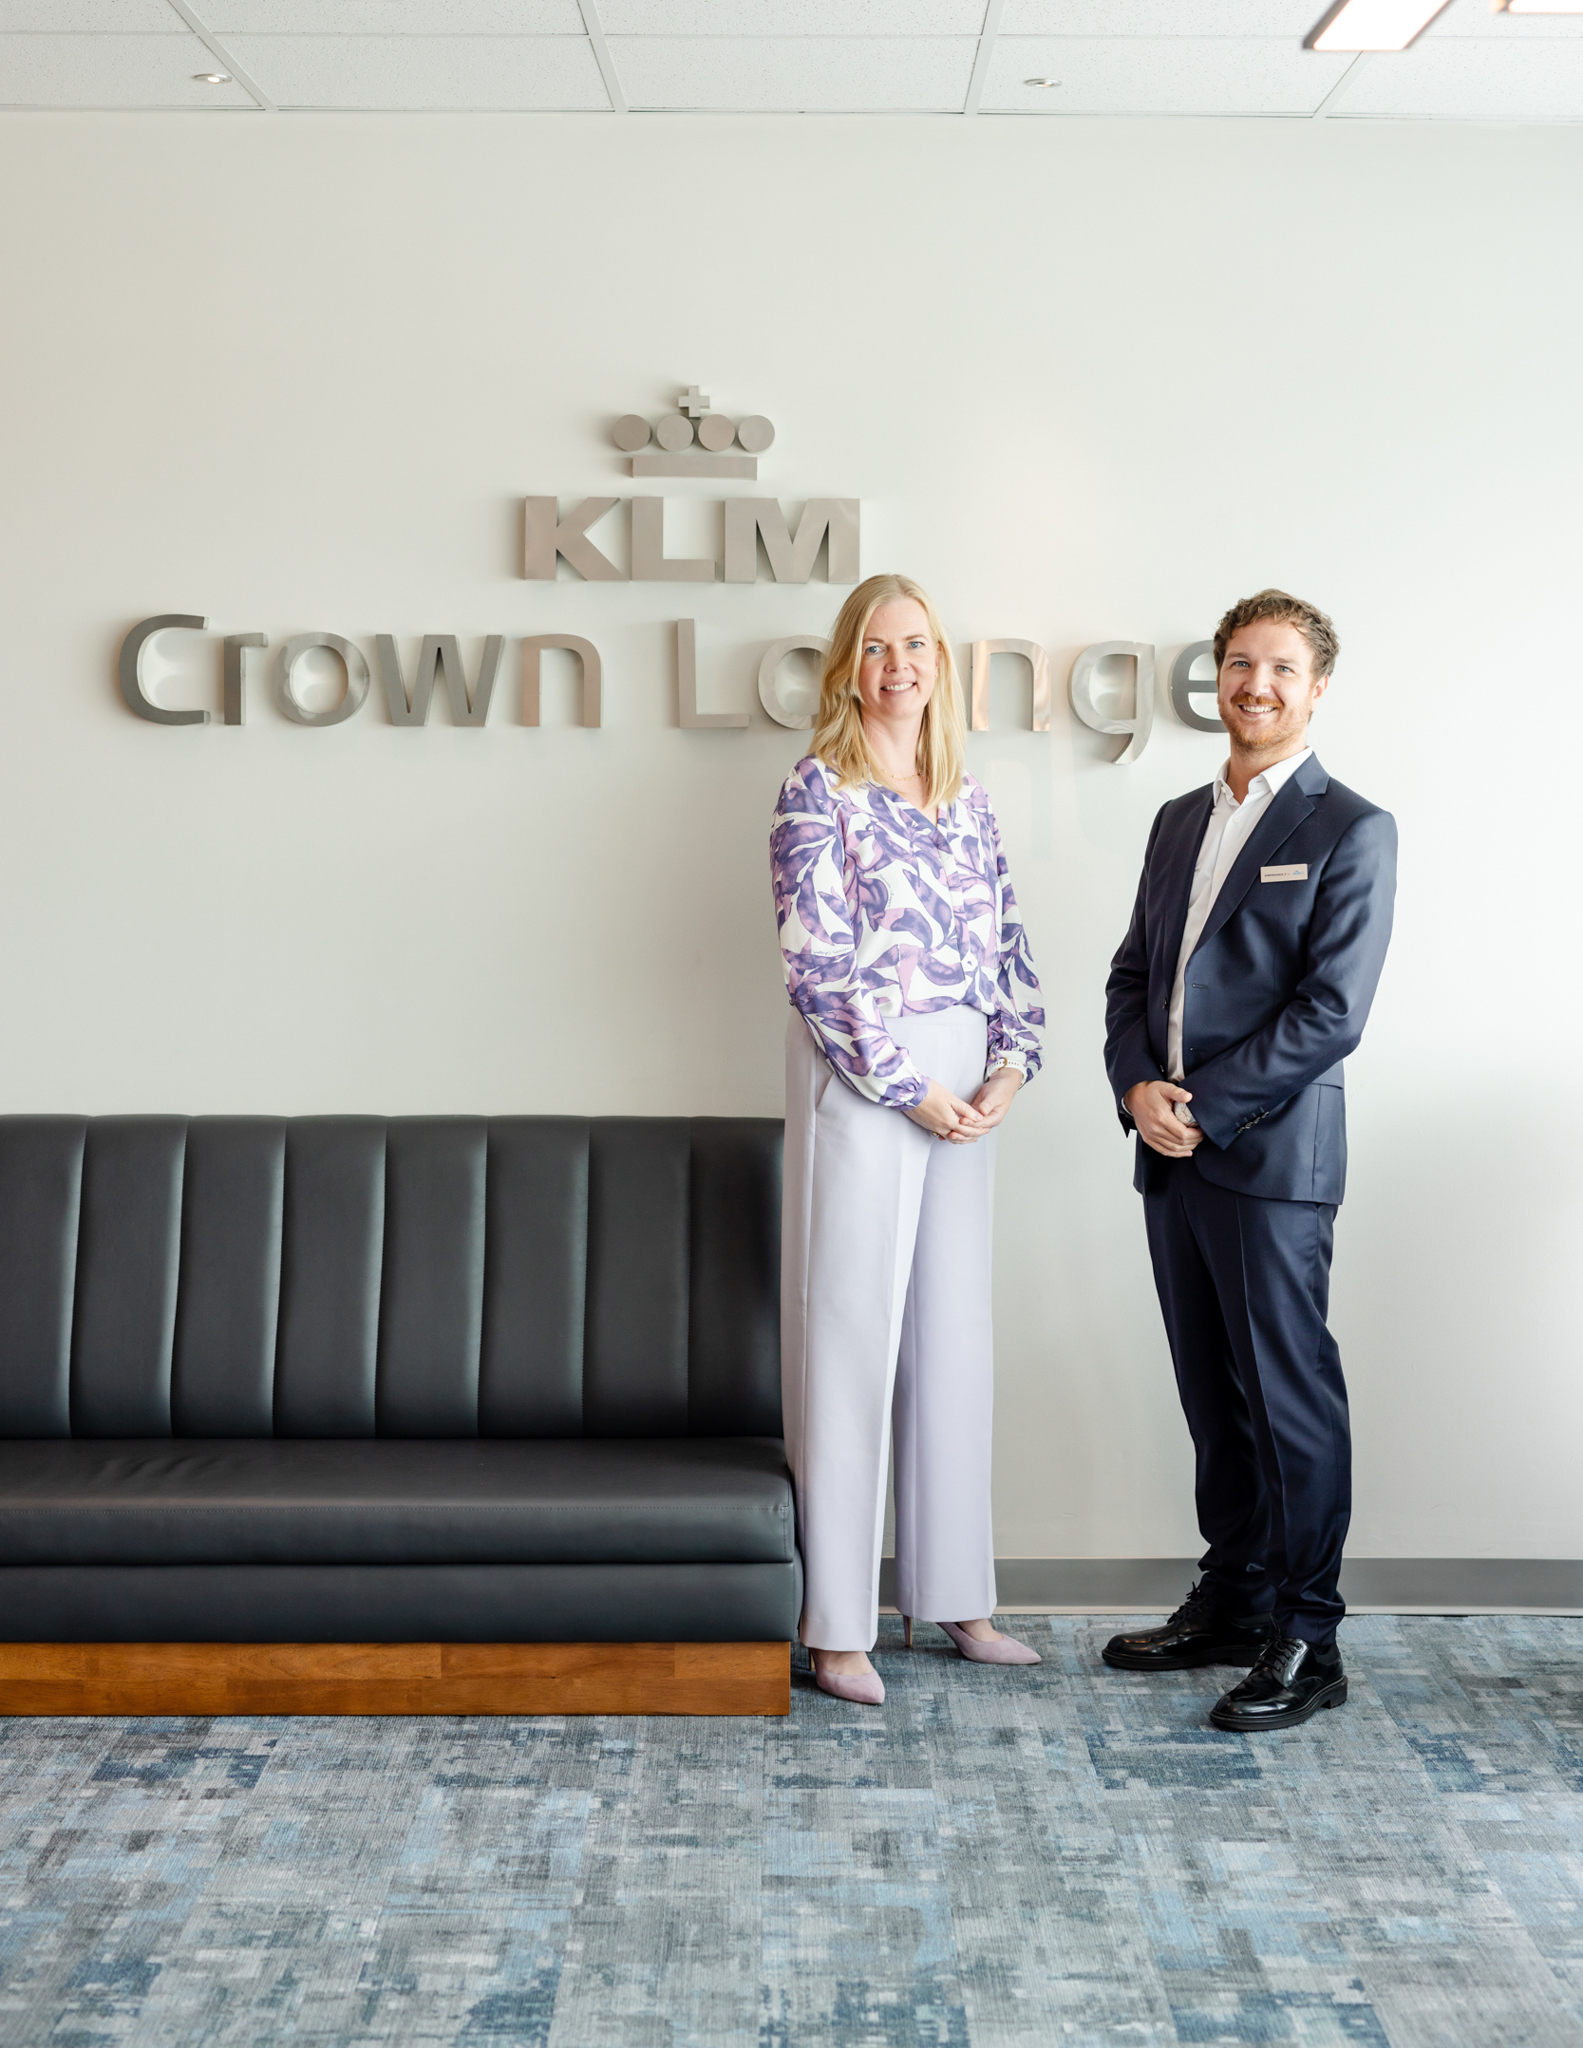 Grand Opening Photography of two people in front of the Crown Lounge sign.